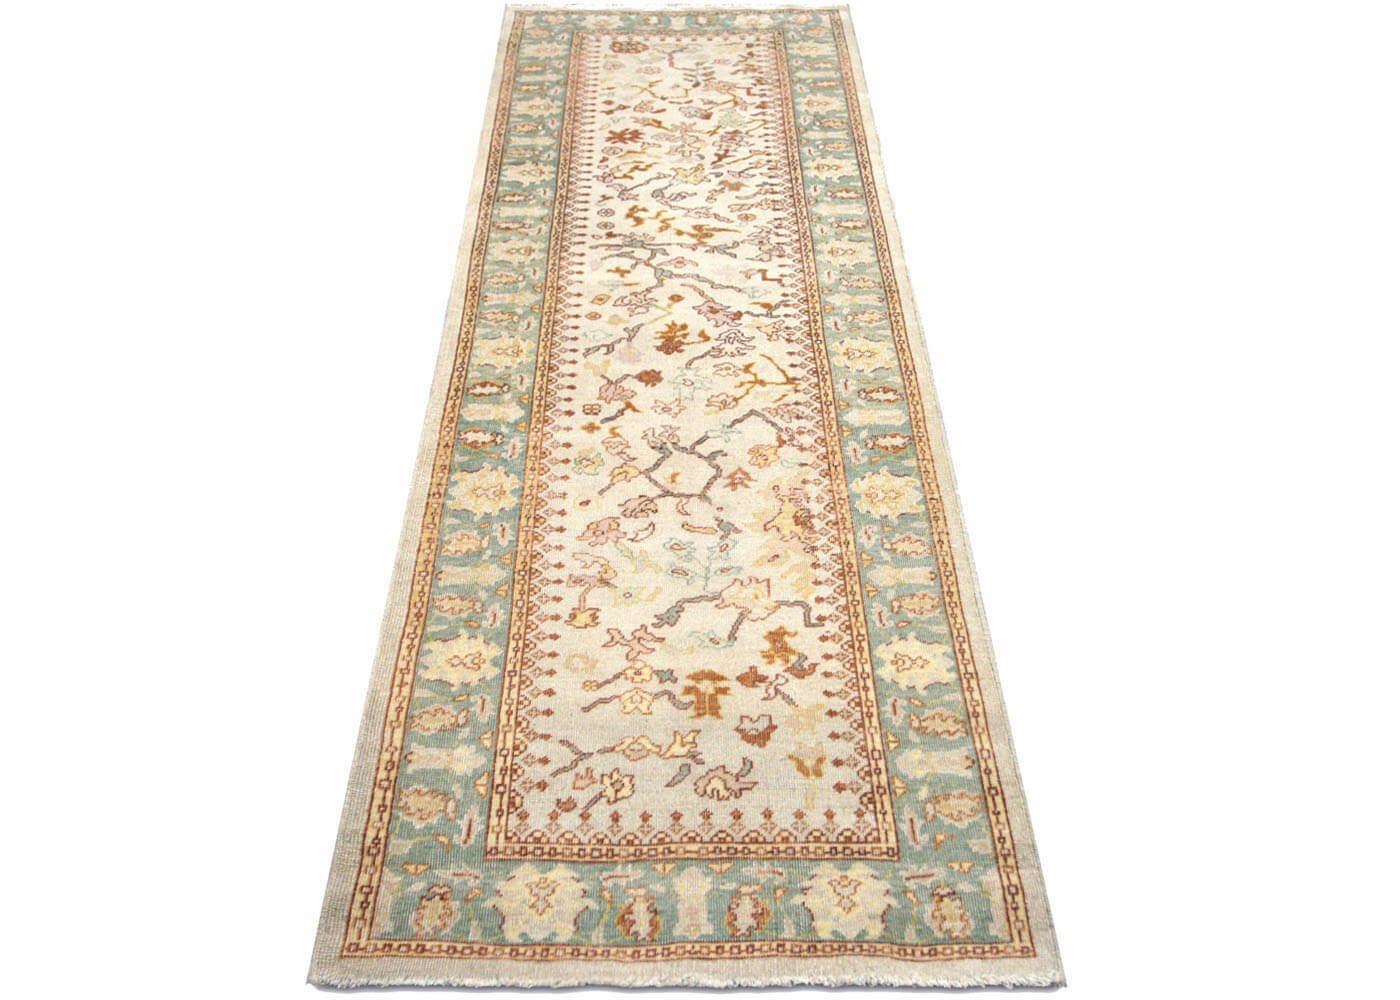 Vintage Egyptian Sultanabad Runner - 3'1" x 9'7"